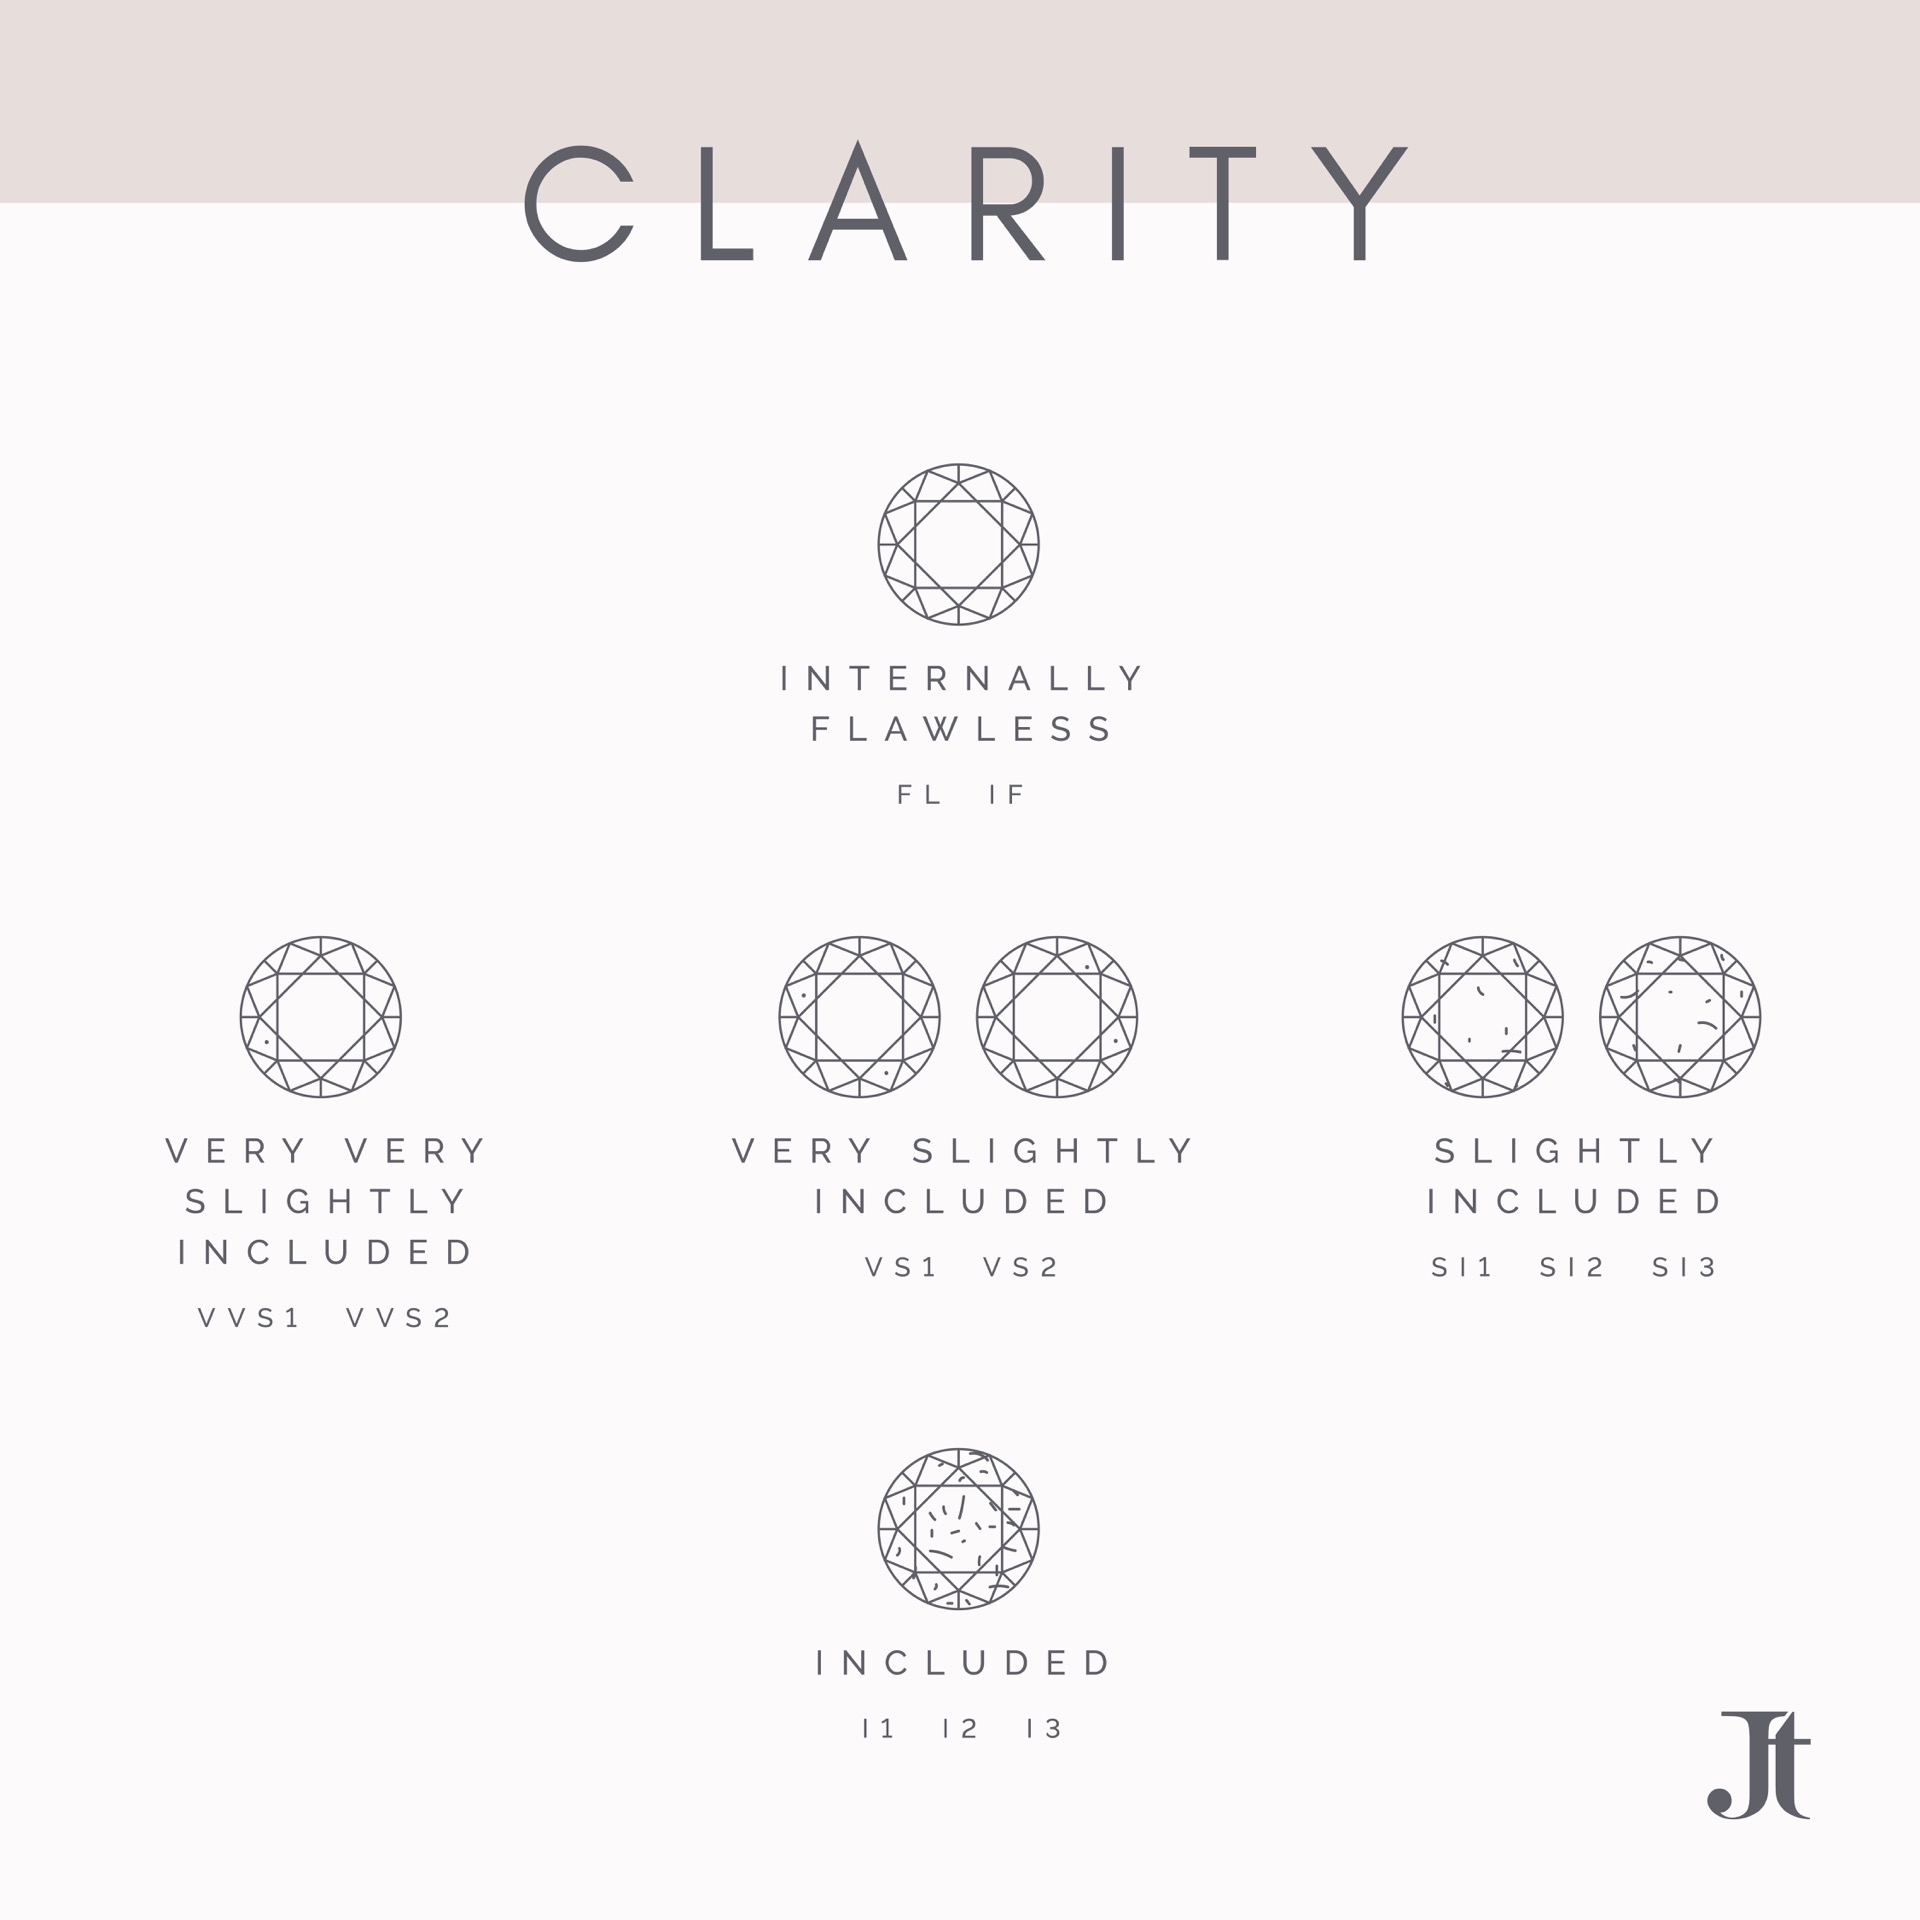 Bristol Jeweller Jacks Turner's Illustration Of The Diamond Four C's, Showing The Diamond Clarity That You Can Choose From For Her Engagement Rings.